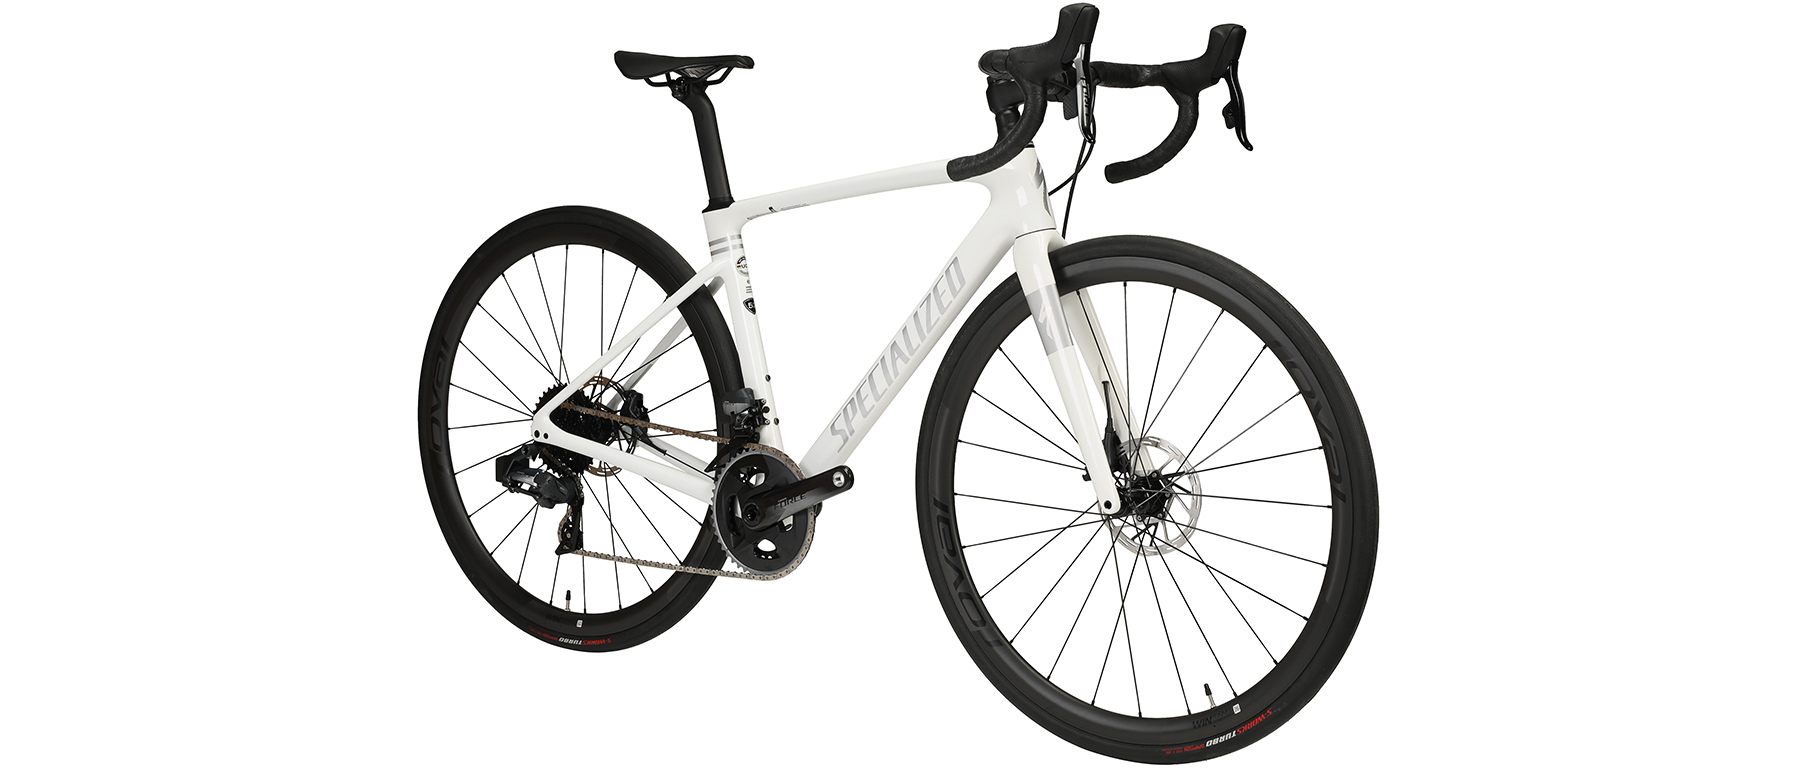 Specialized Roubaix Pro Bicycle